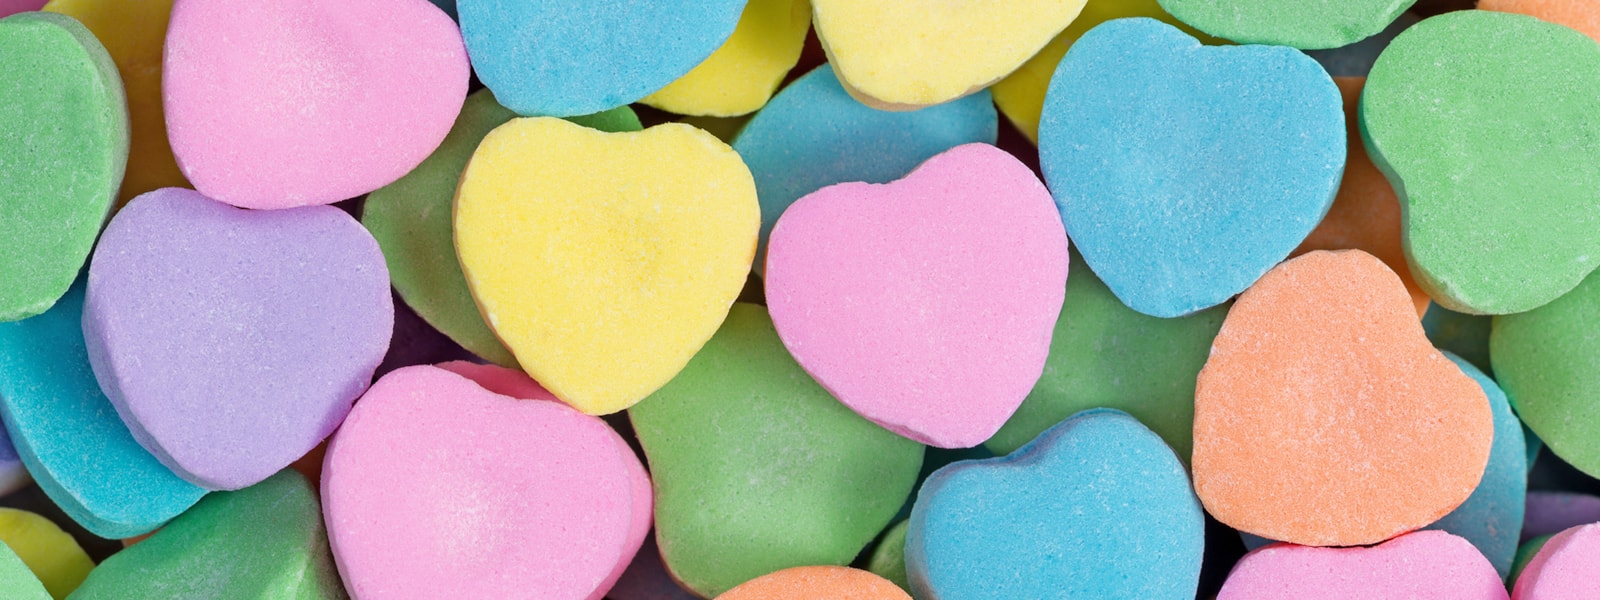 colorful conversation hearts for Valentine's Day